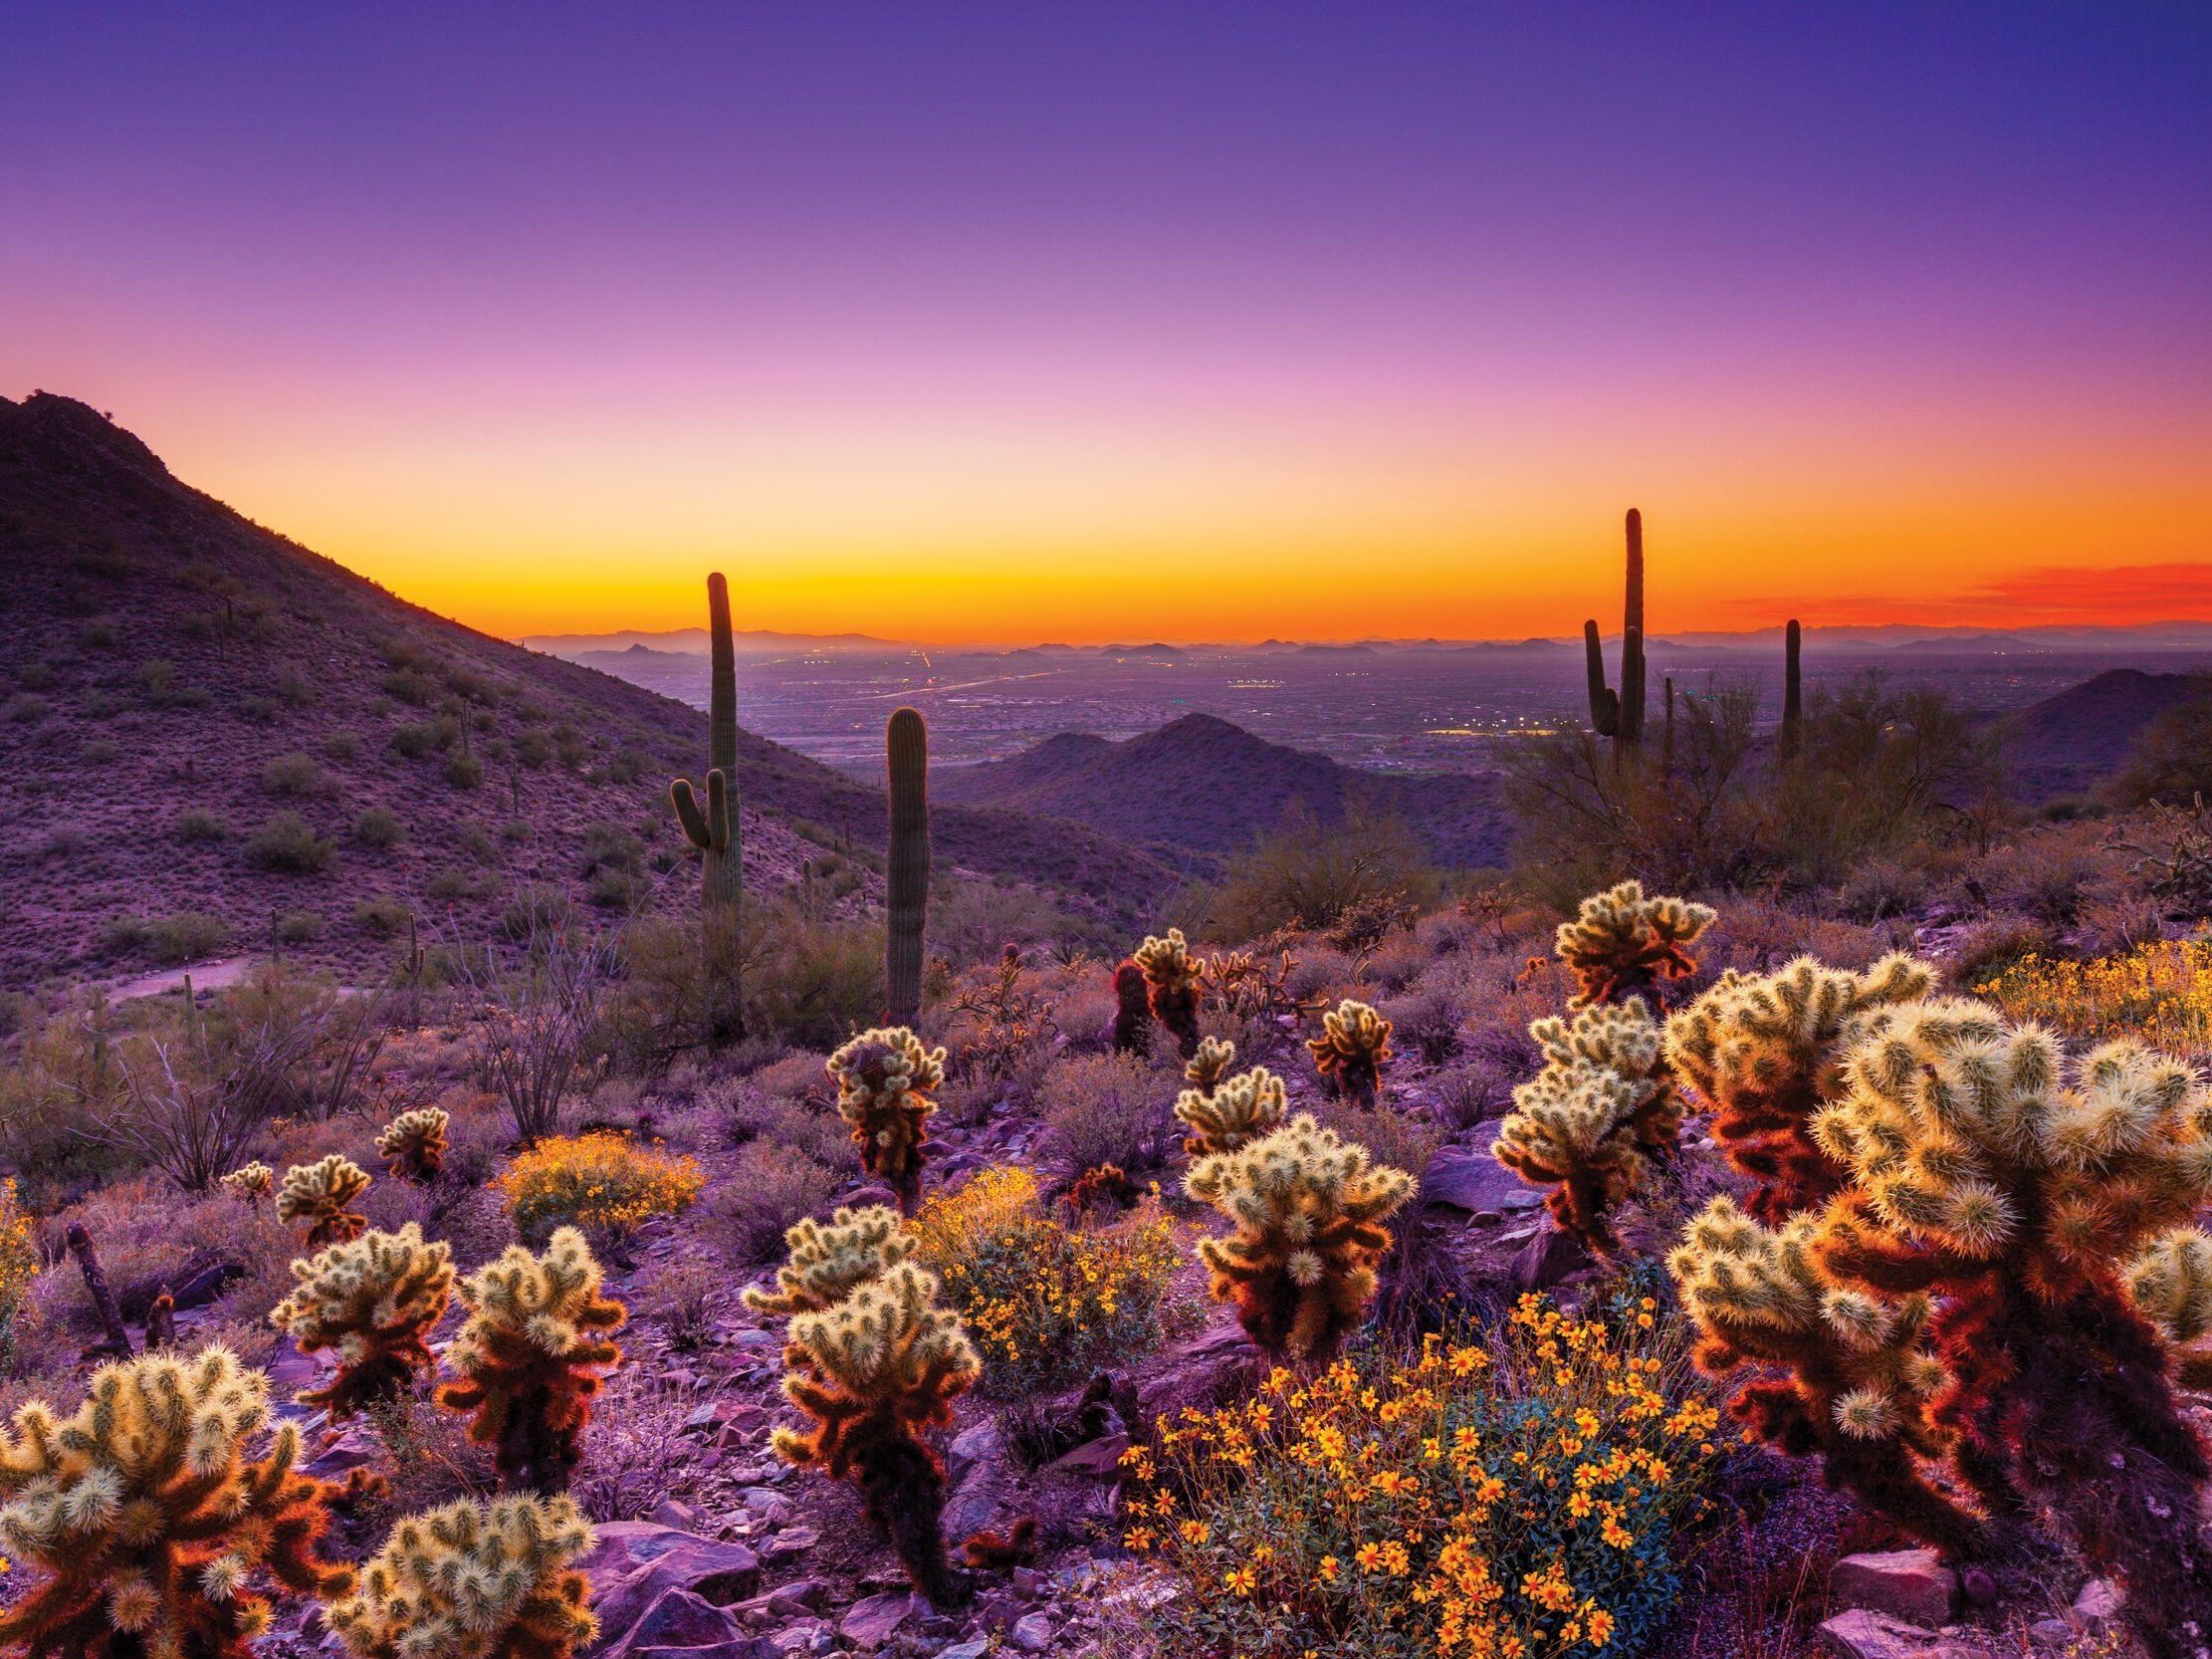 The Top 5 Reasons to Visit Scottsdale, Arizona Now